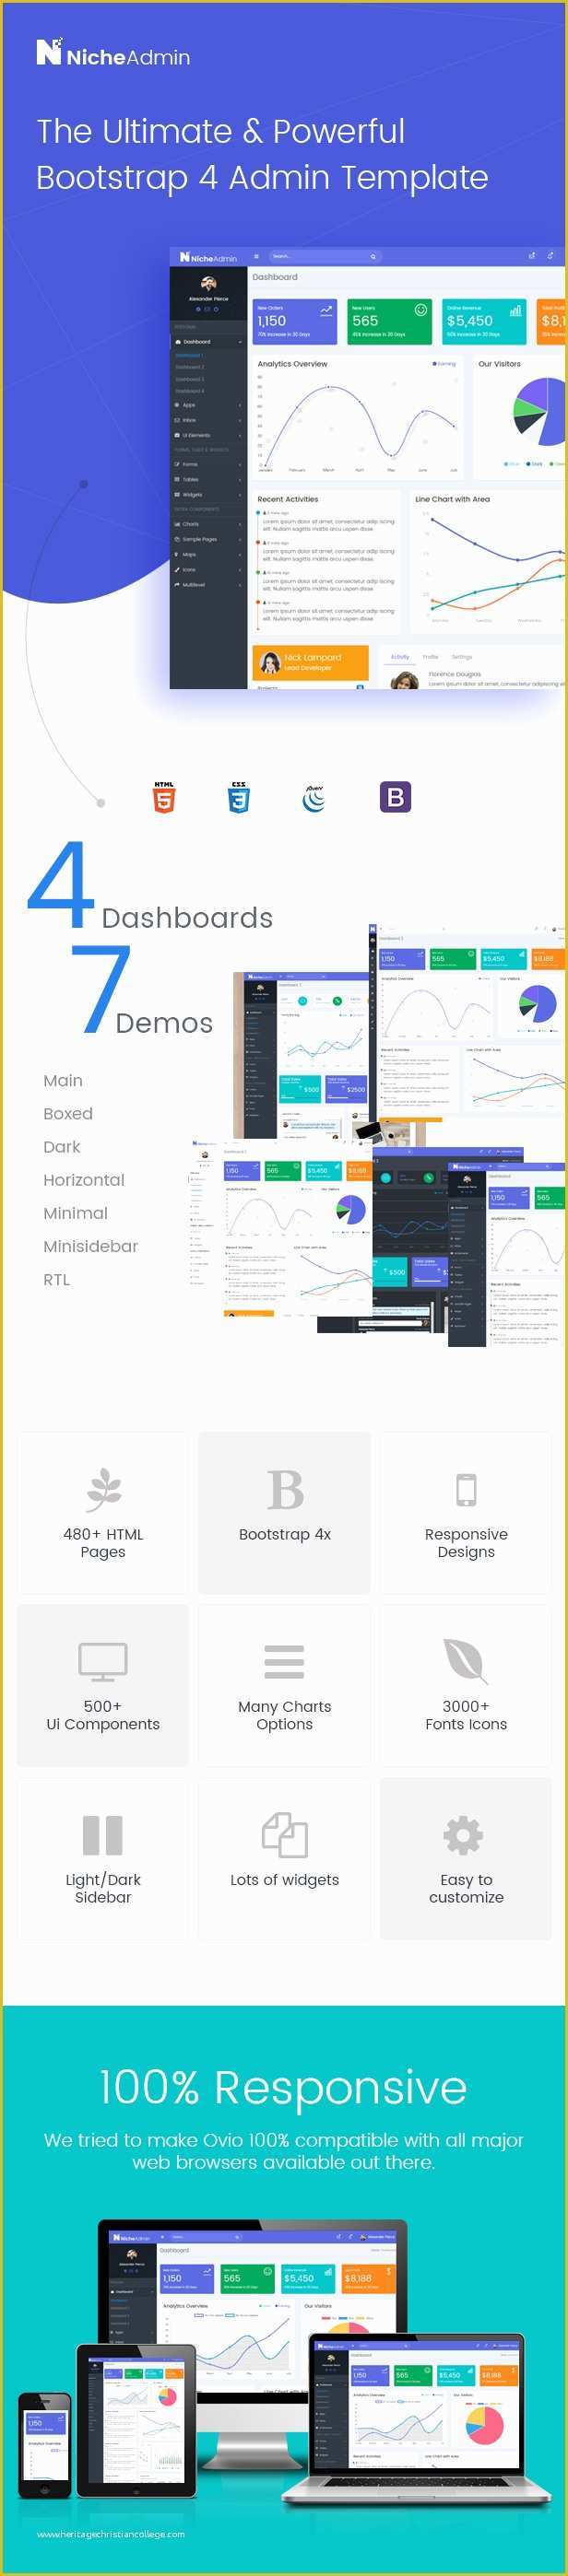 Bootstrap 4 Dashboard Template Free Of Niche Admin Powerful Bootstrap 4 Dashboard and Admin